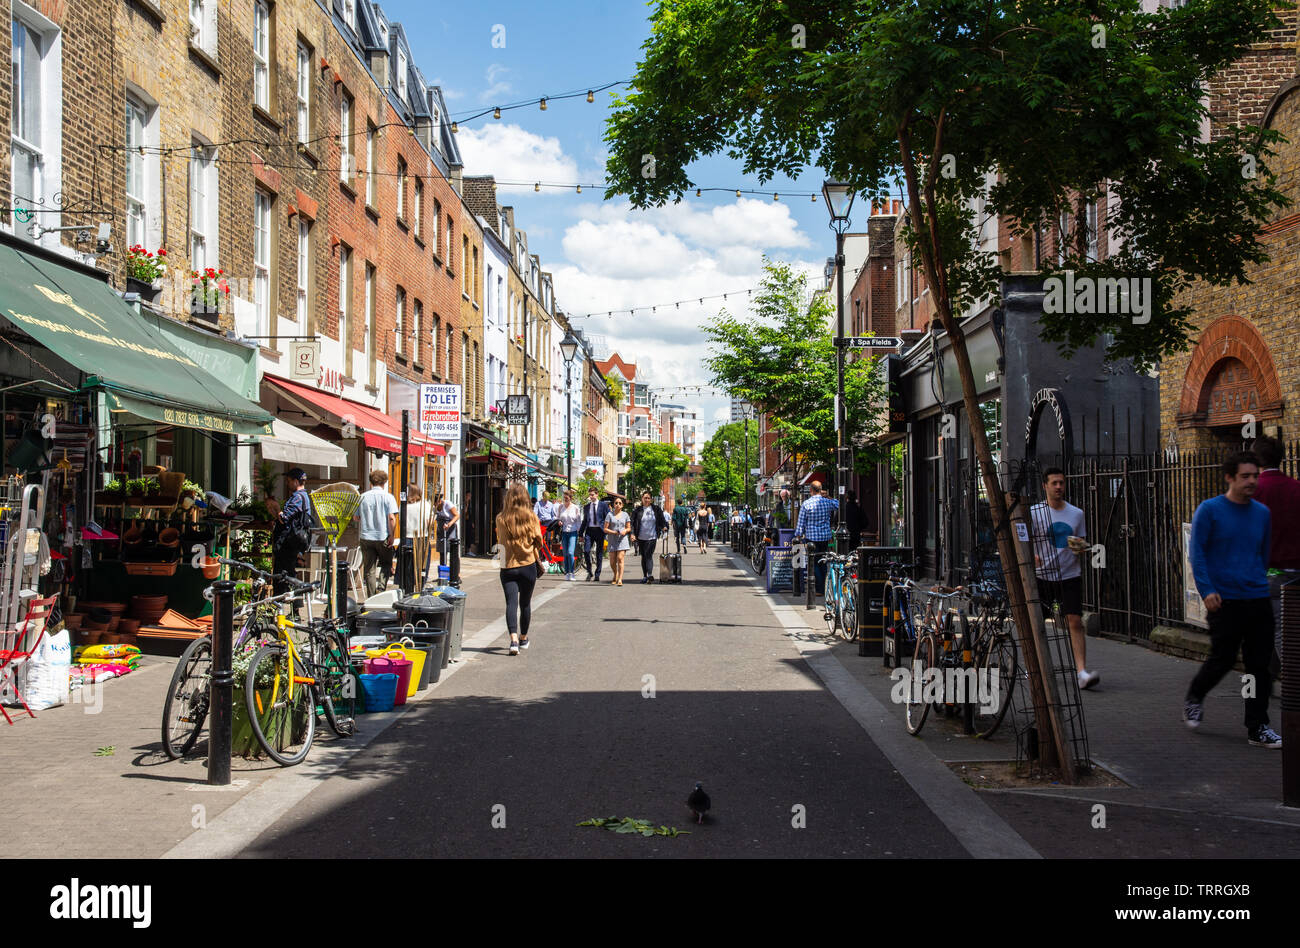 London, England, UK - June 3, 2019: Pedestrians browse shops and restuarants on Exmouth Market in London. Stock Photo